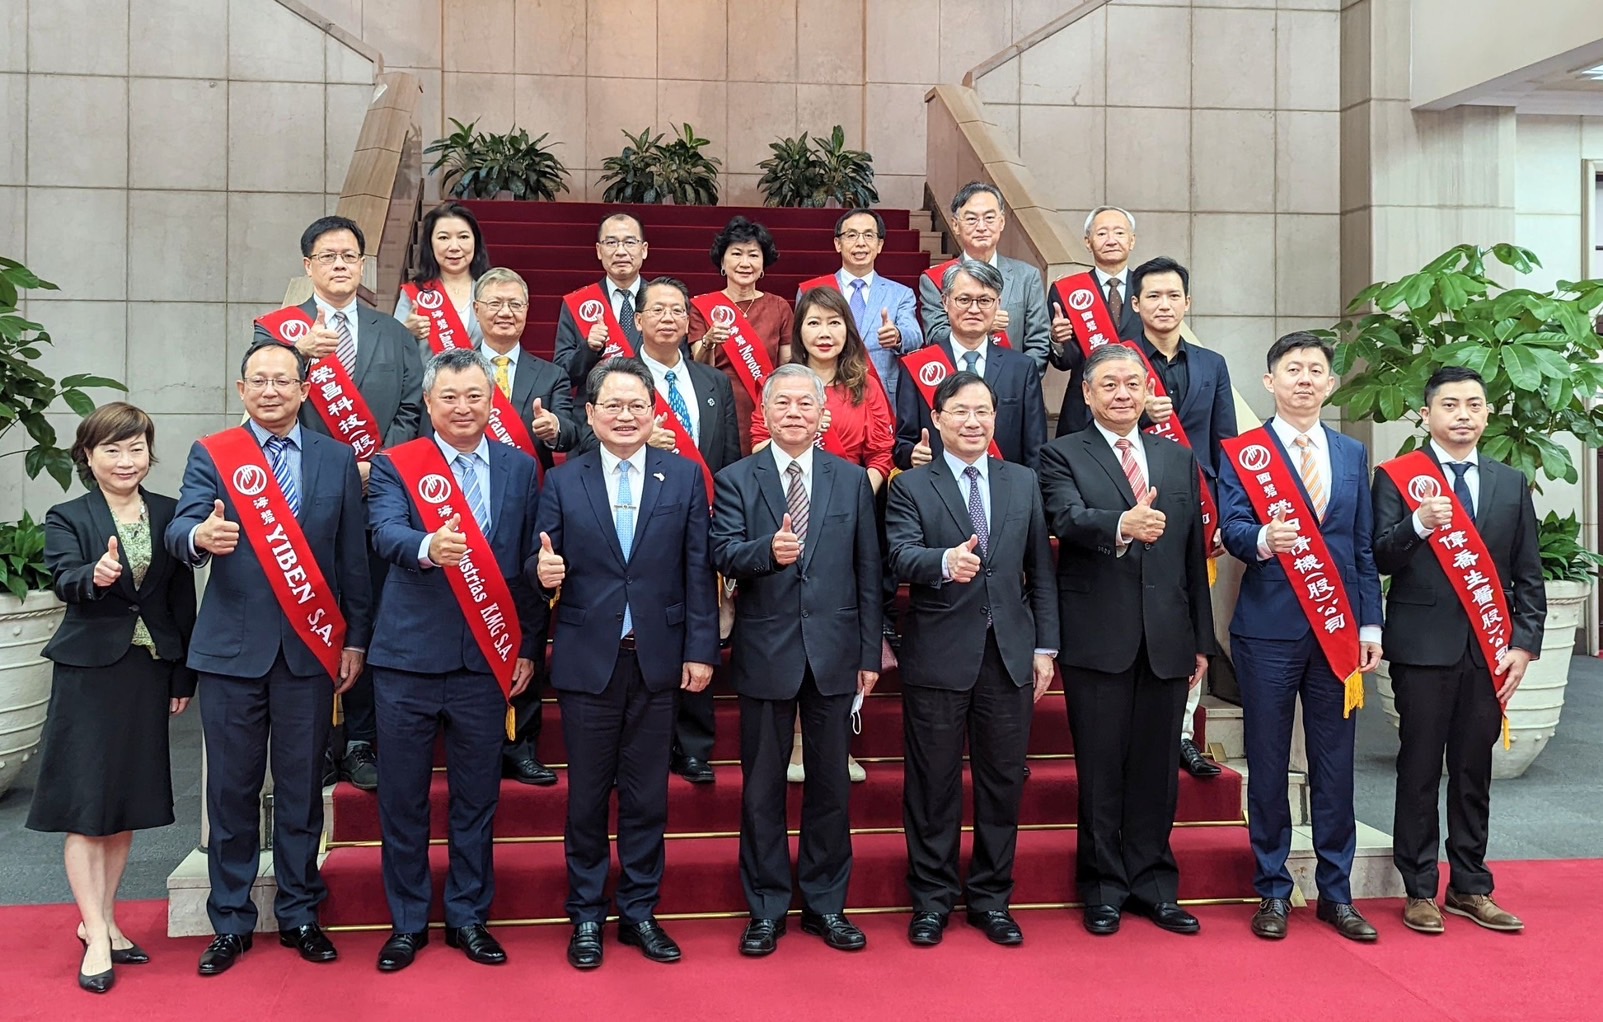 Vice President Gary Chen of the NASME  led the new companies that won the 31th of  SMEs Award and the 24rd Overseas of SMEs Award  to visit the Executive Yuan